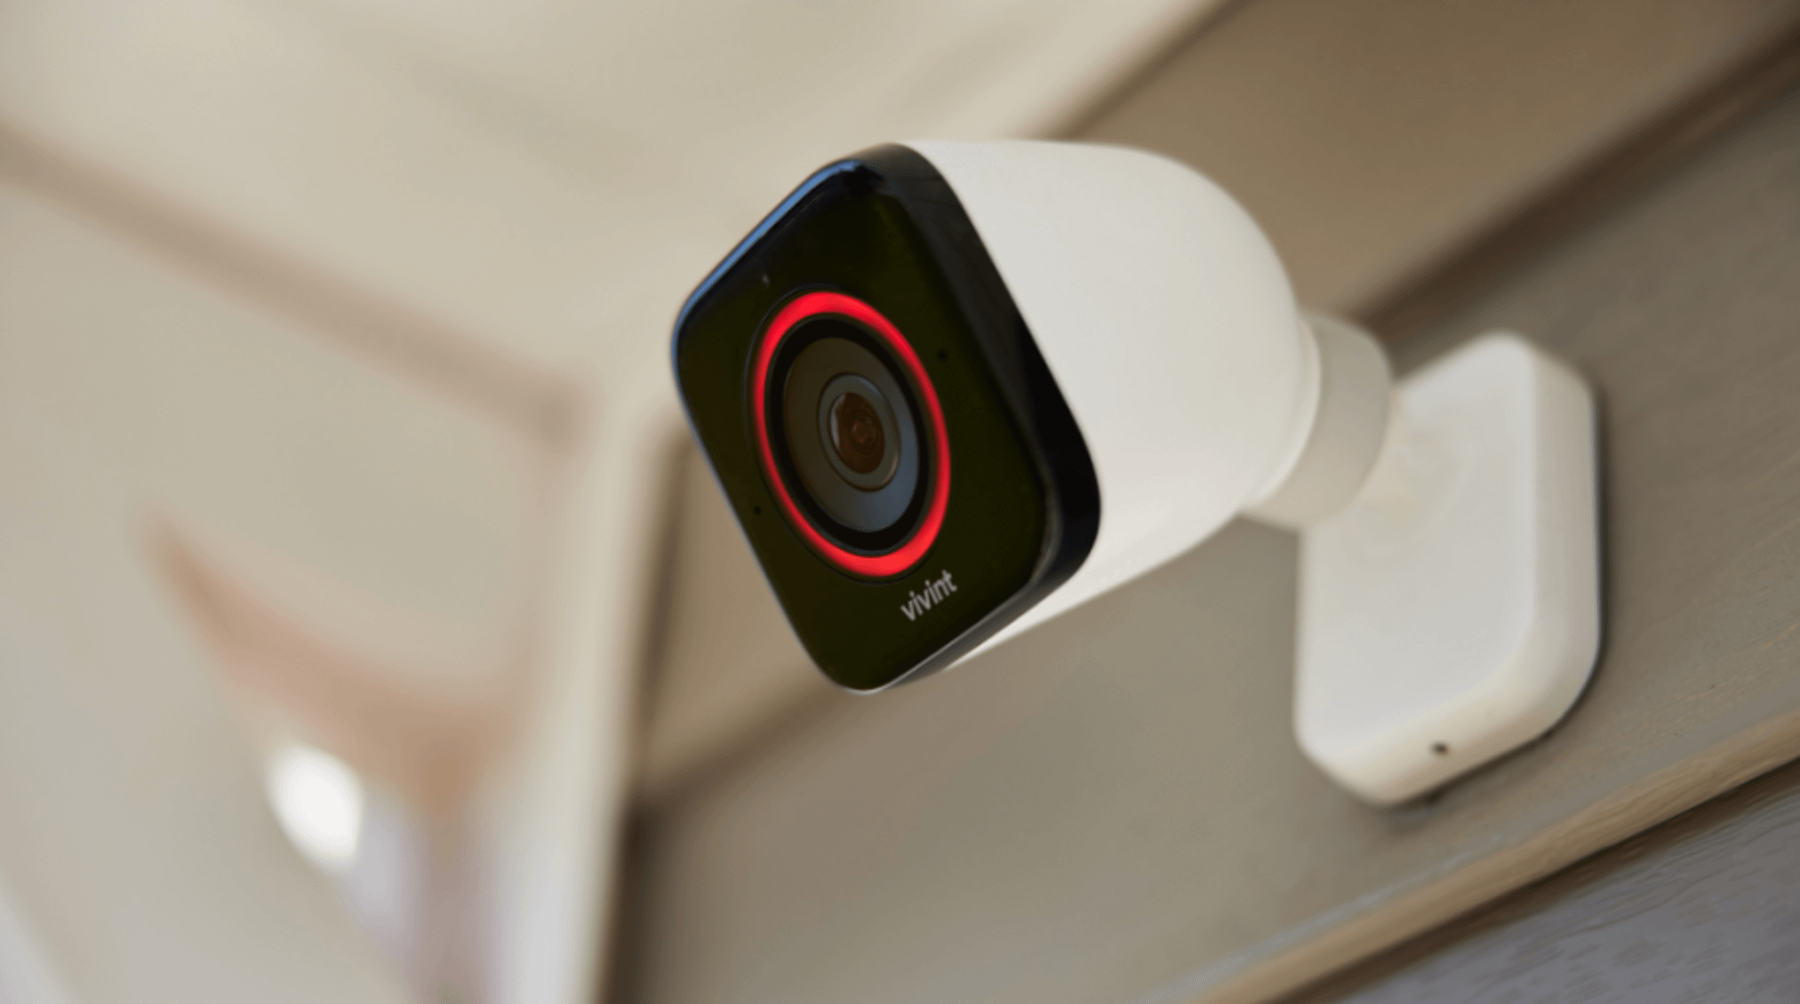 Vivint Pro camera mounted on the wall